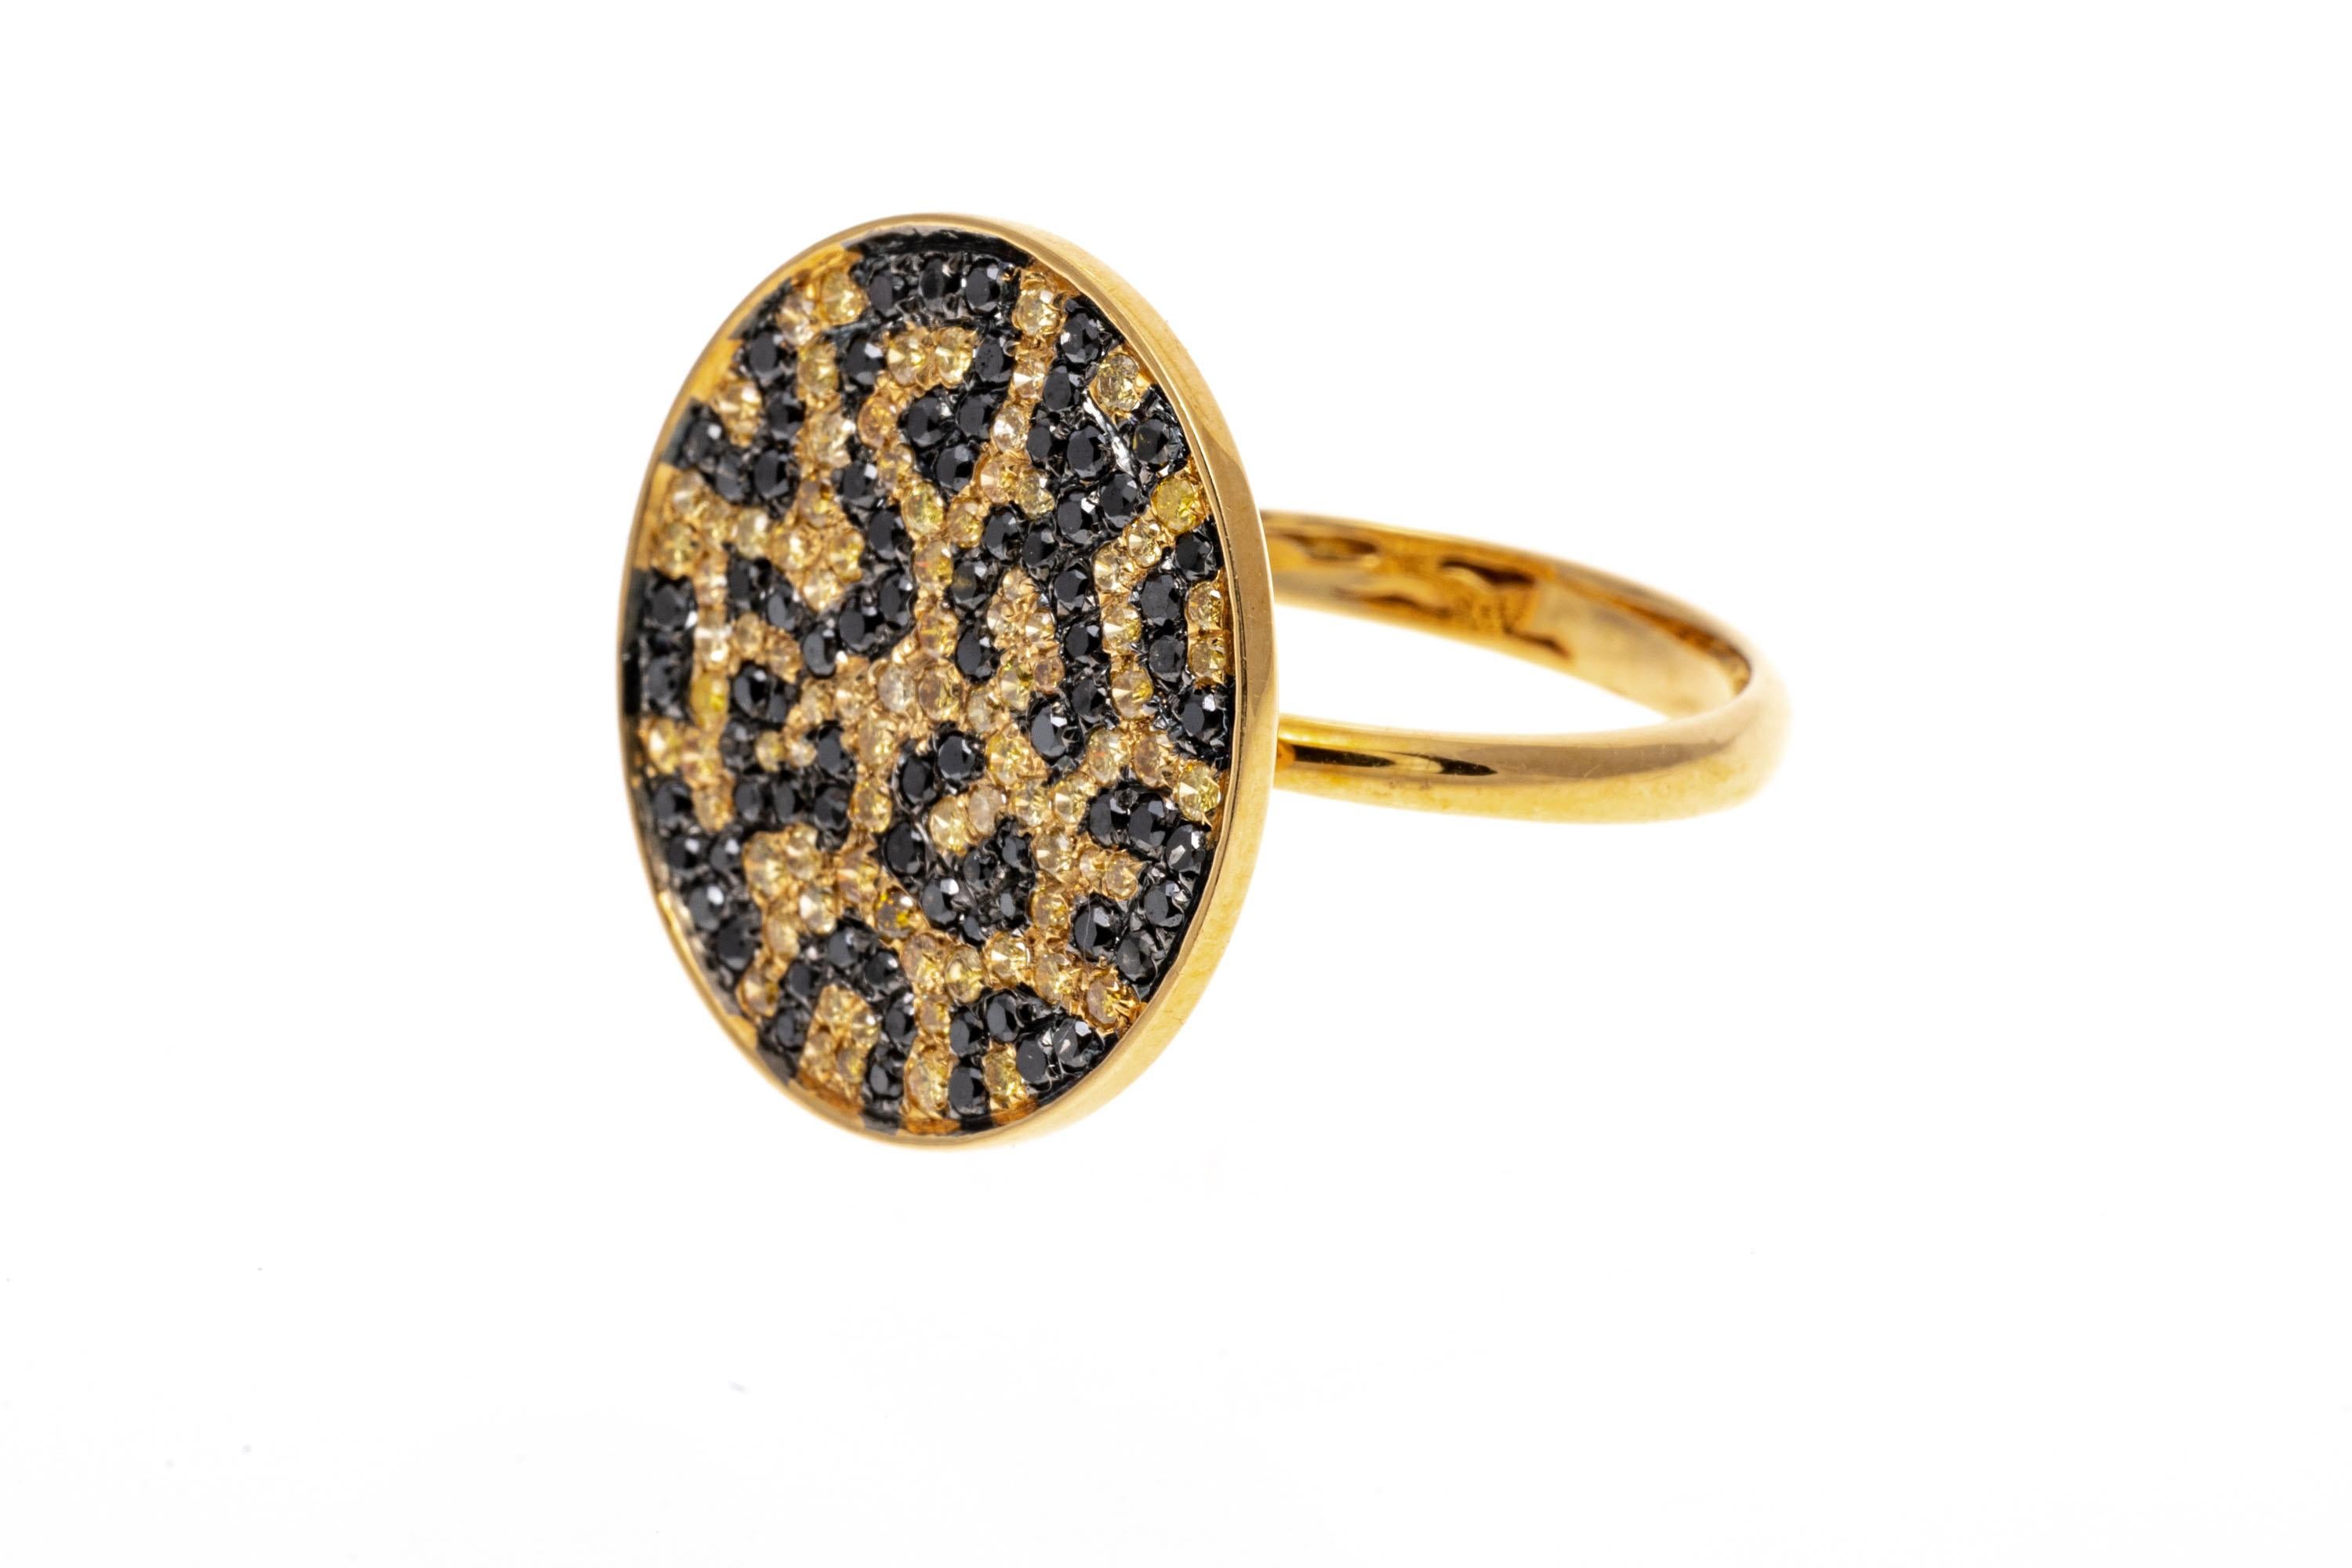 18k yellow gold ring. This fabulous mod ring is contemporary round disc top ring, pave set with round faceted black diamond 